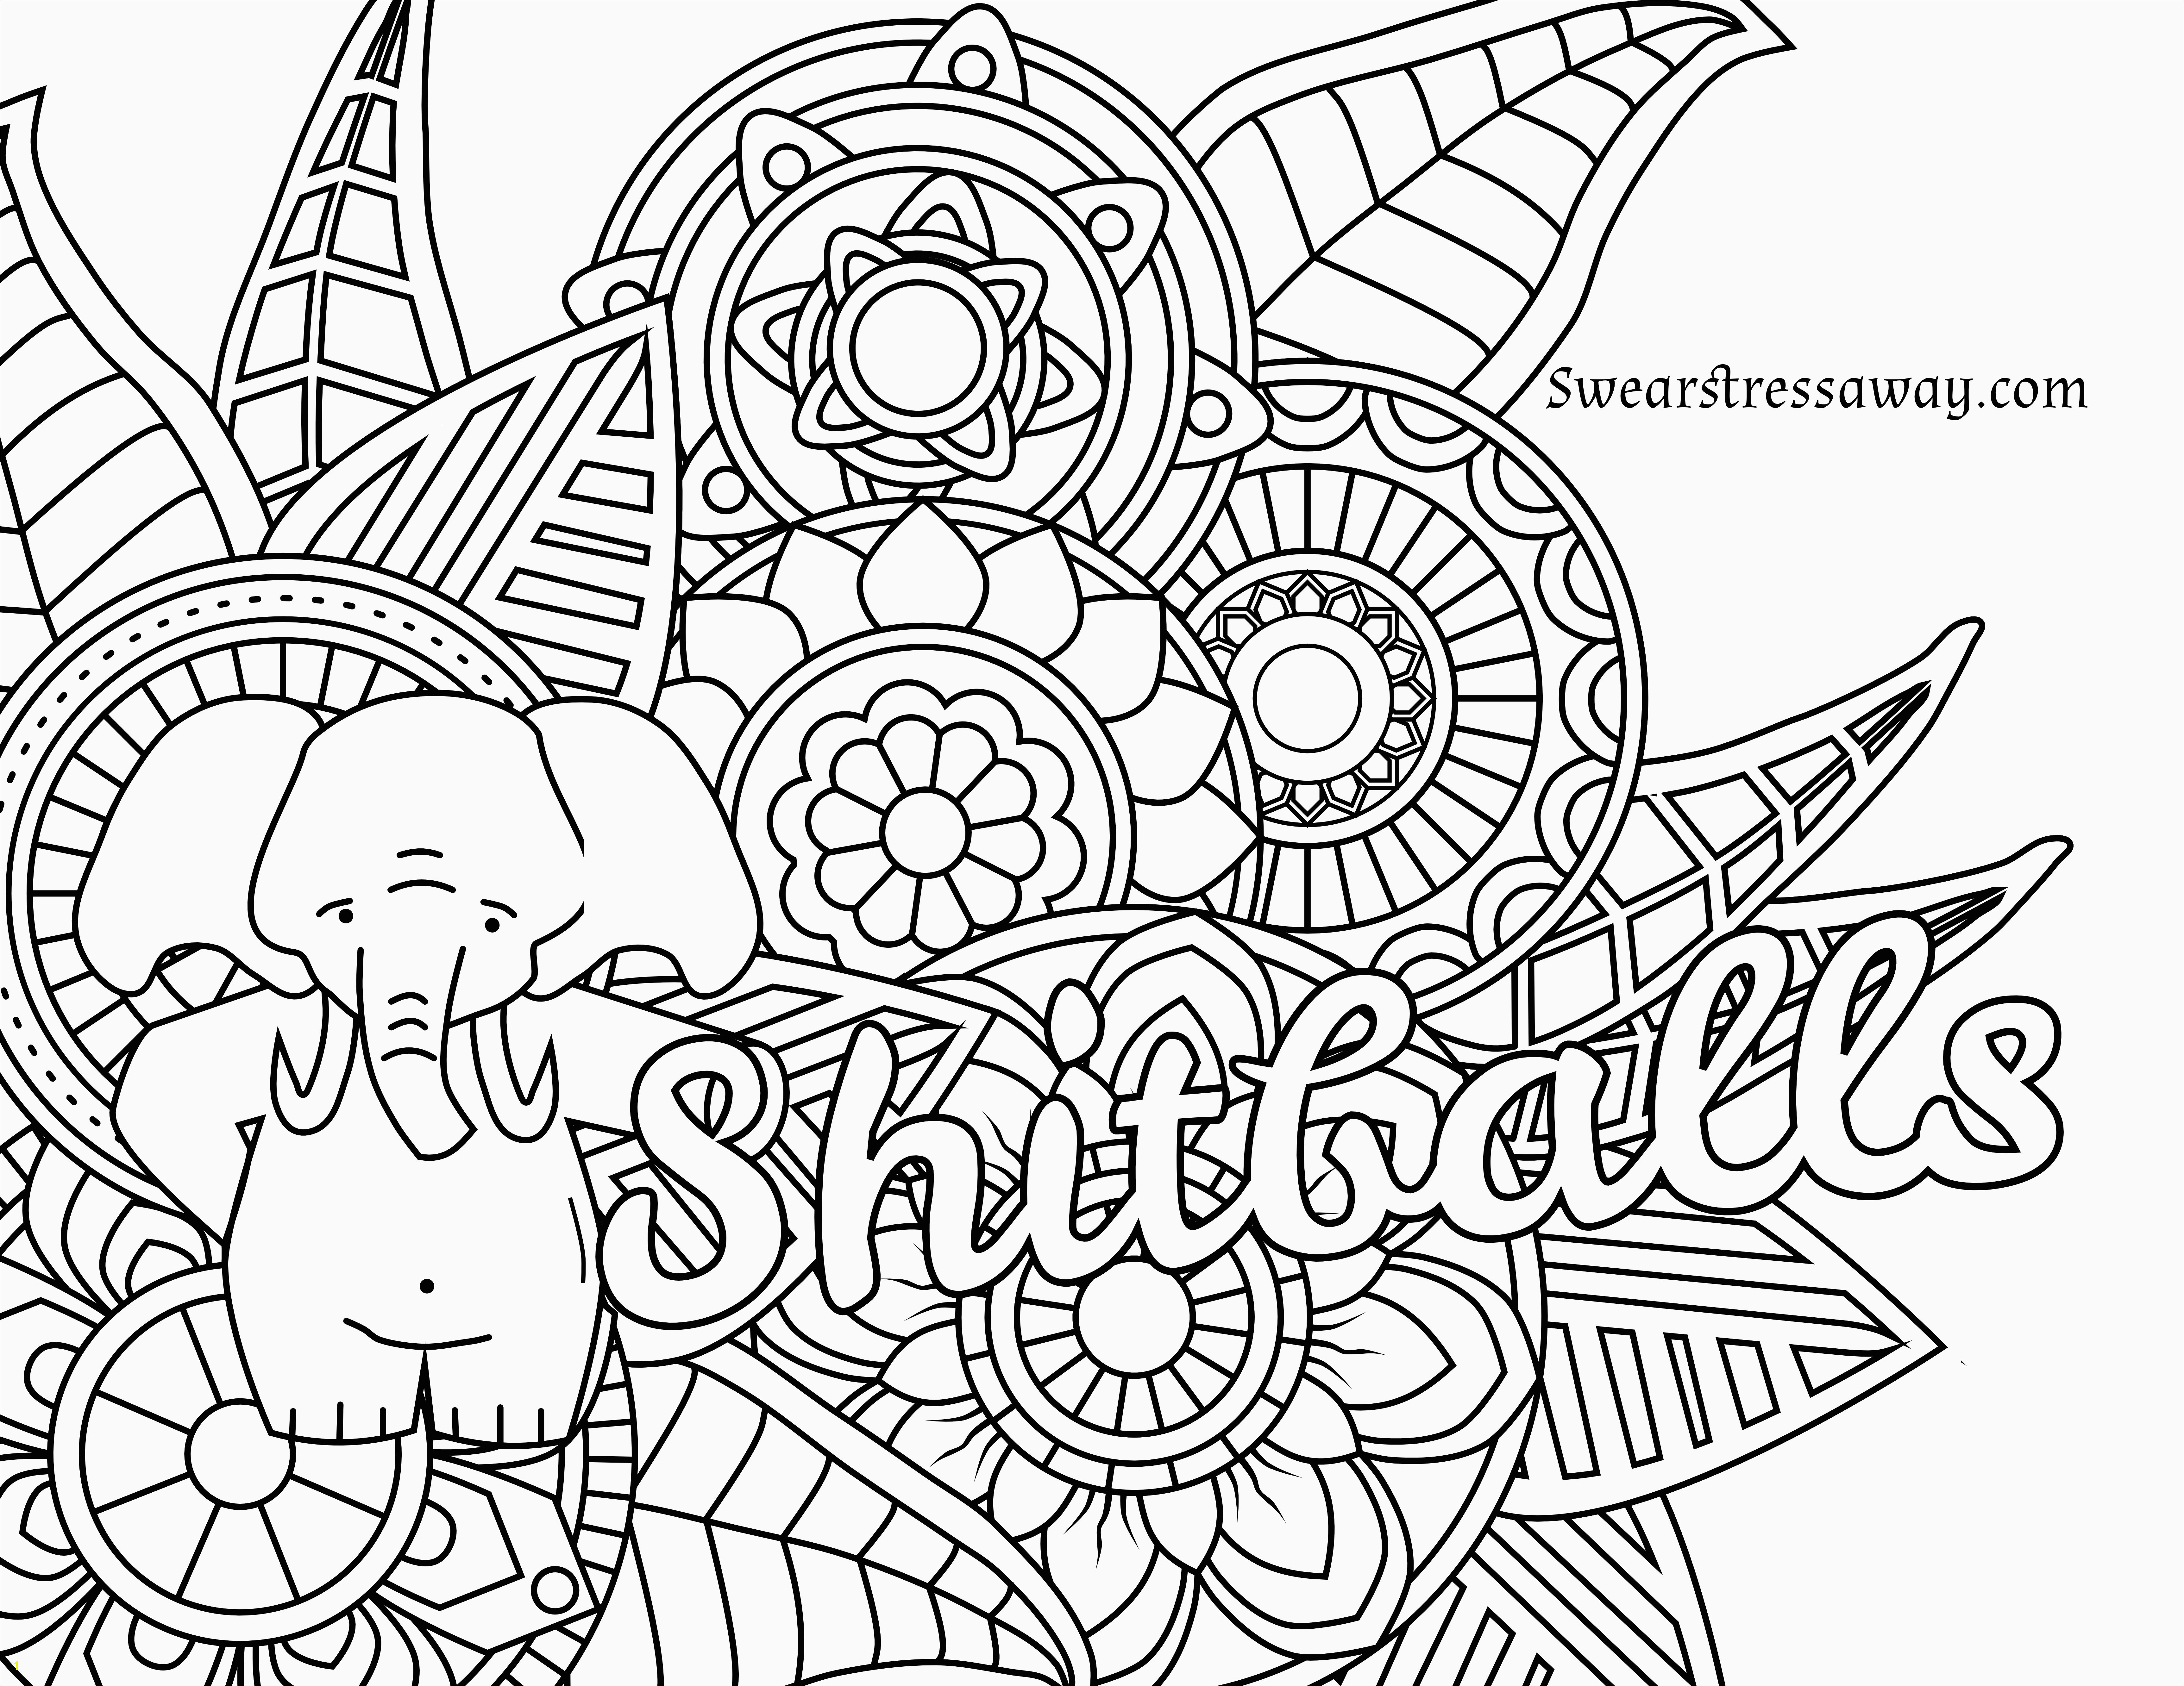 Word Coloring Pages Printable Free Swear Word Coloring Pages for Adults